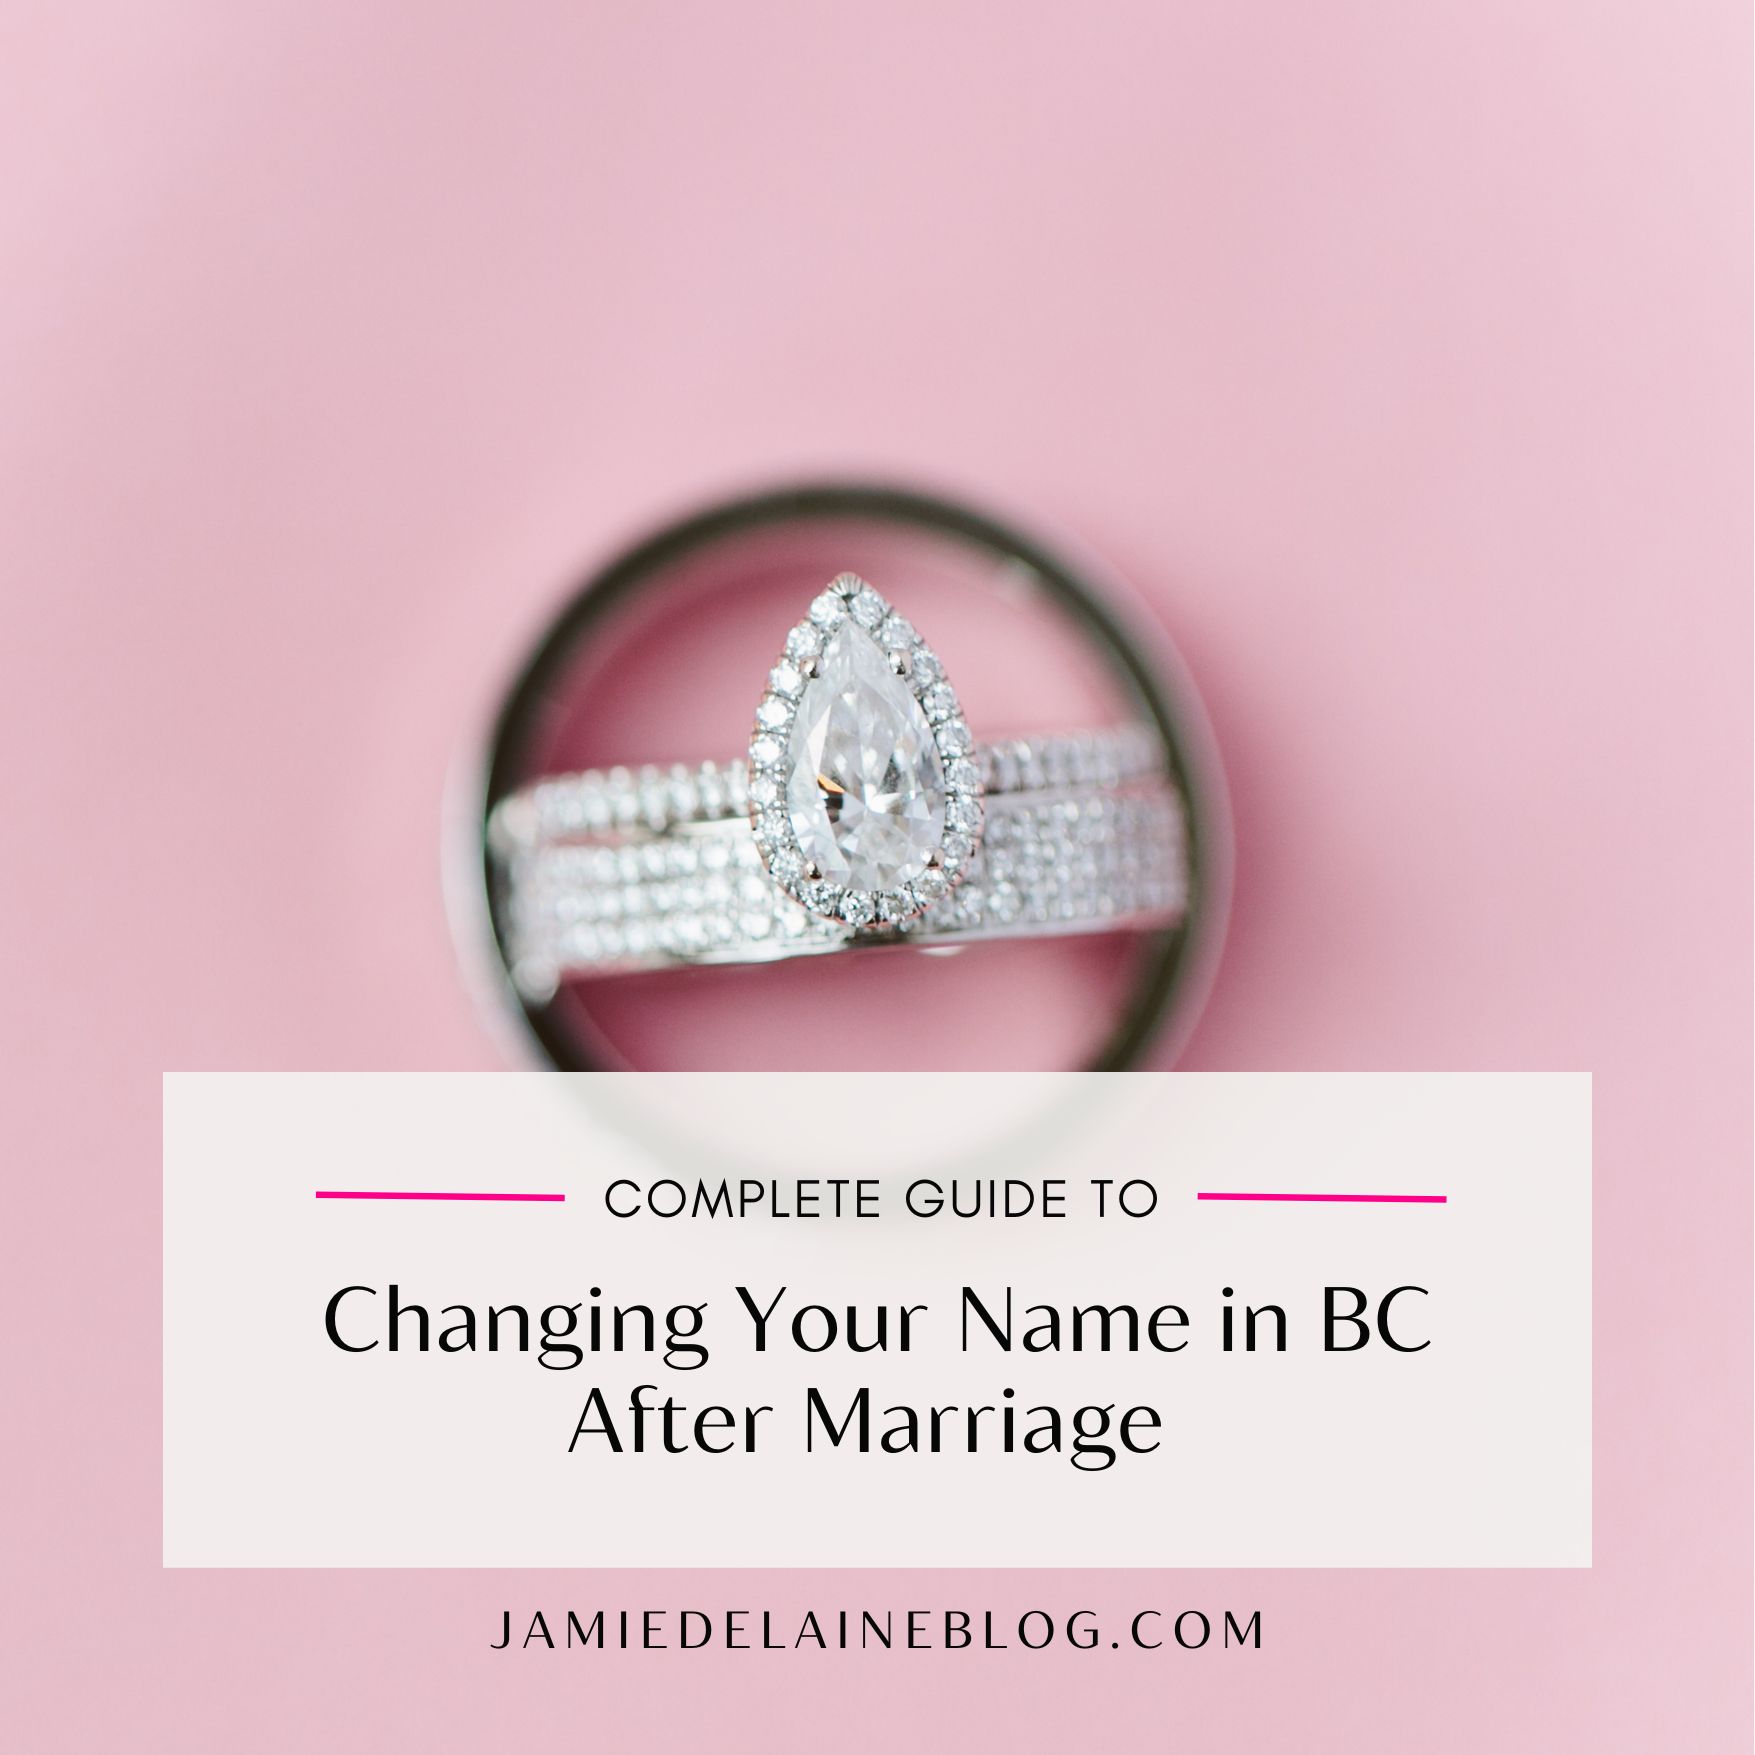 How to Change Your Name in BC After Marriage